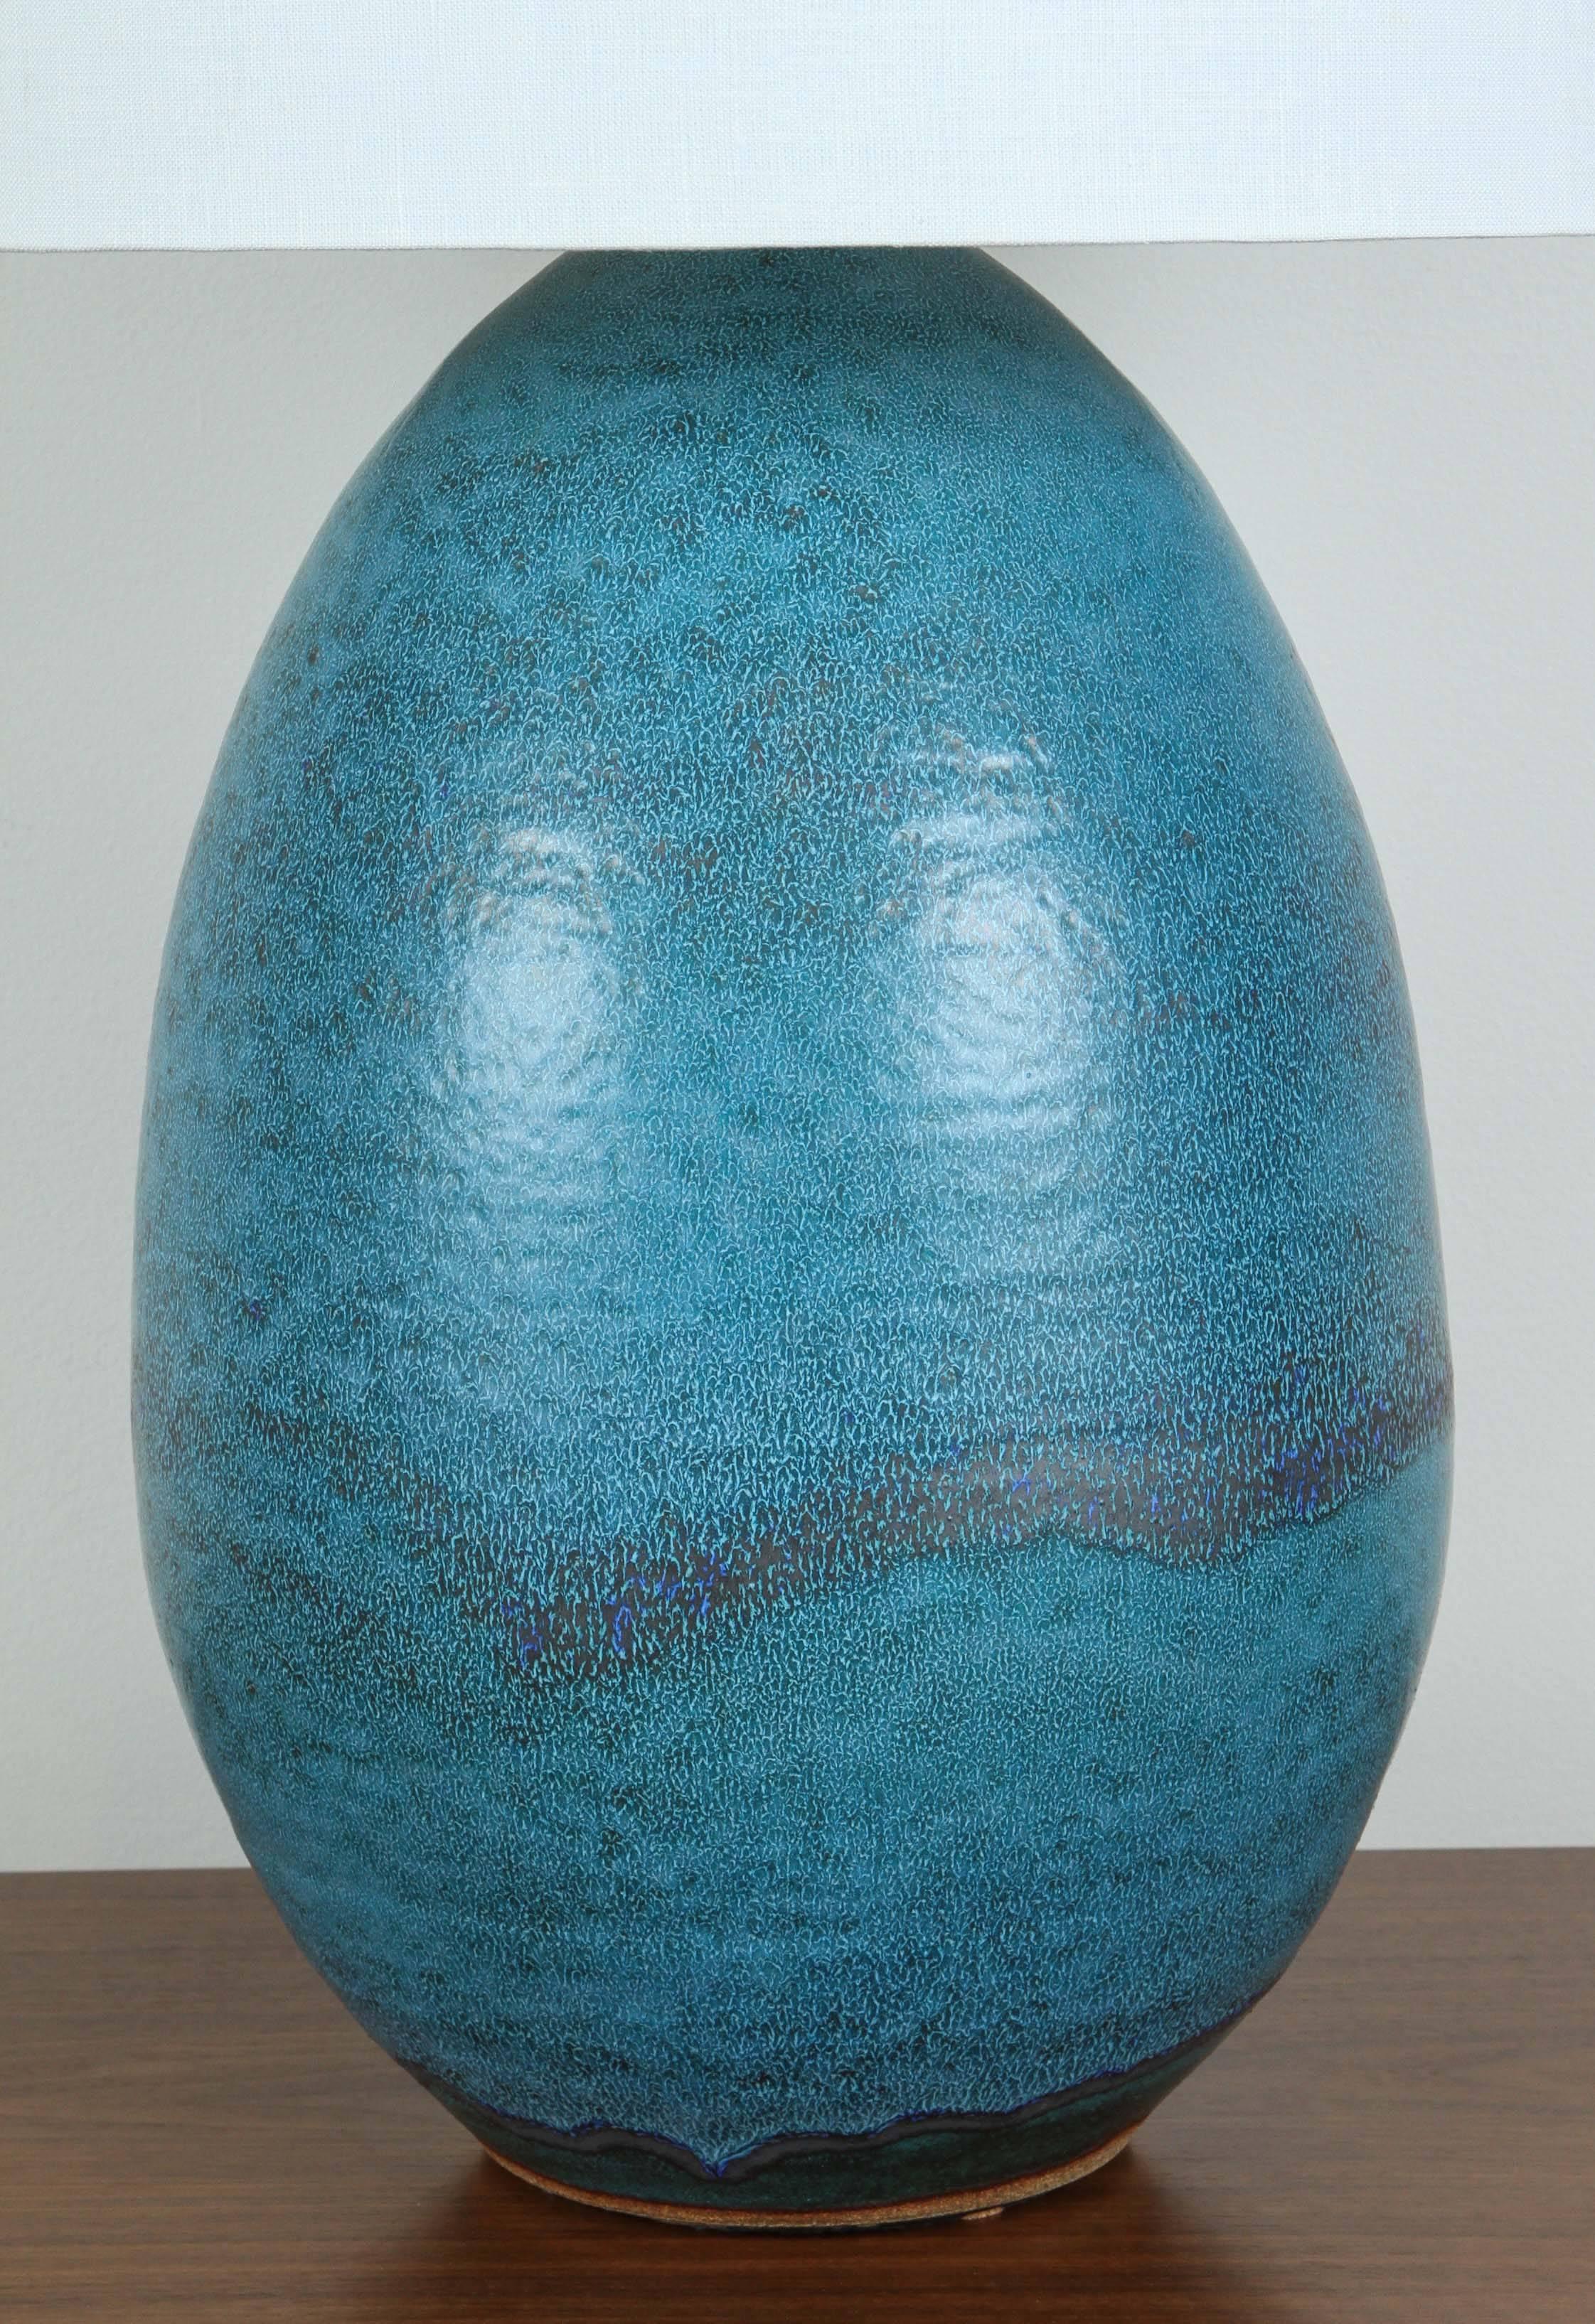 Mid-Century Modern XL Ceramic Pod Lamp in Turquoise by Victoria Morris for Lawson-Fenning